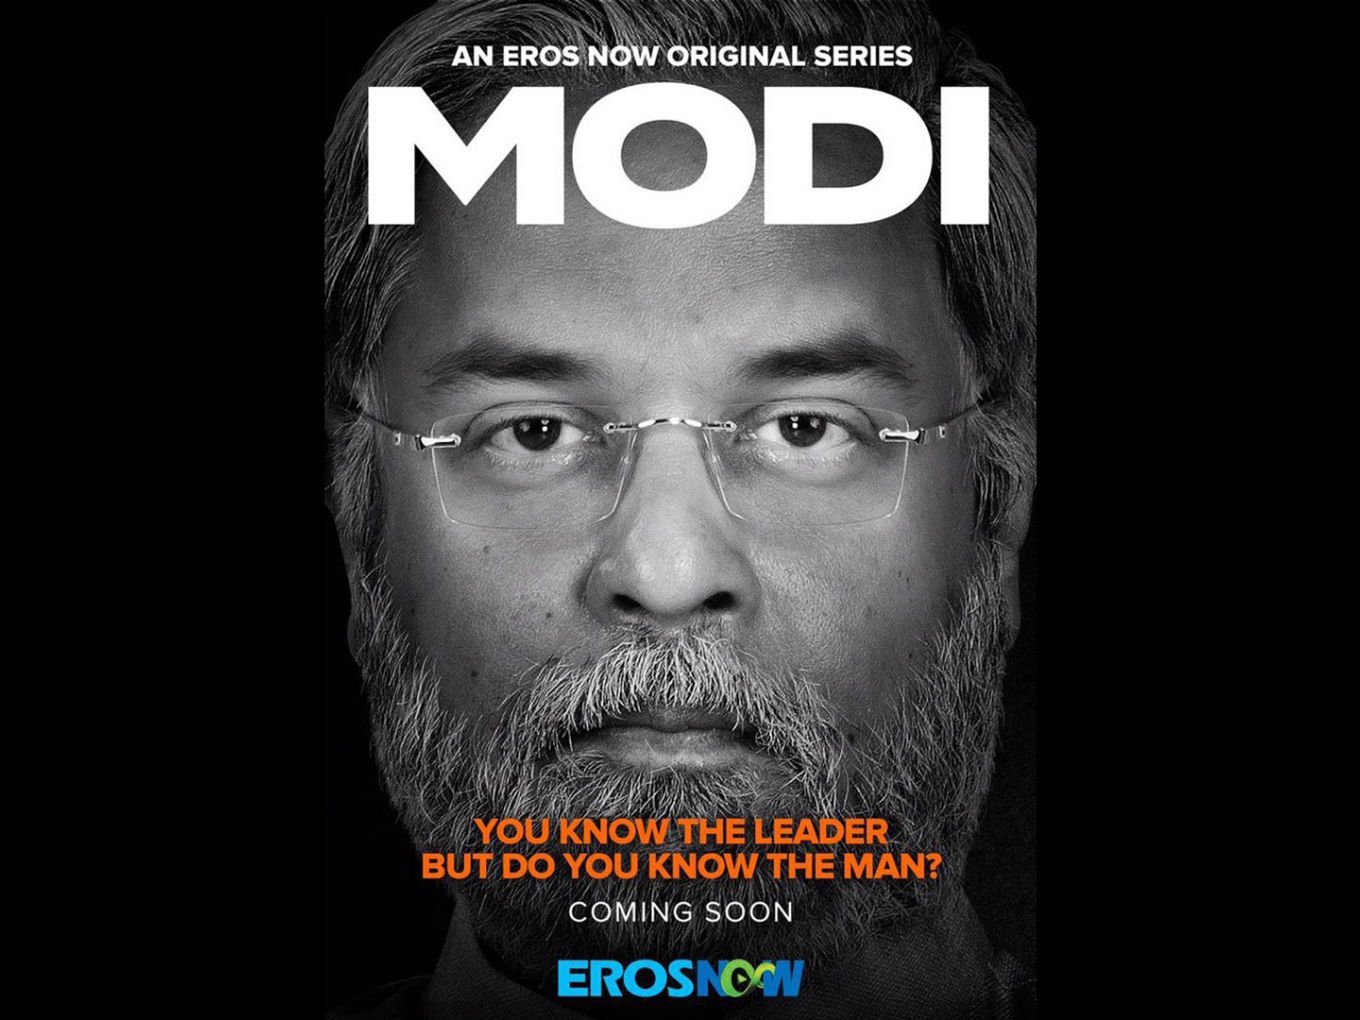 Stop Streaming Web Series On PM Modi, Election Commission Tells Eros Now